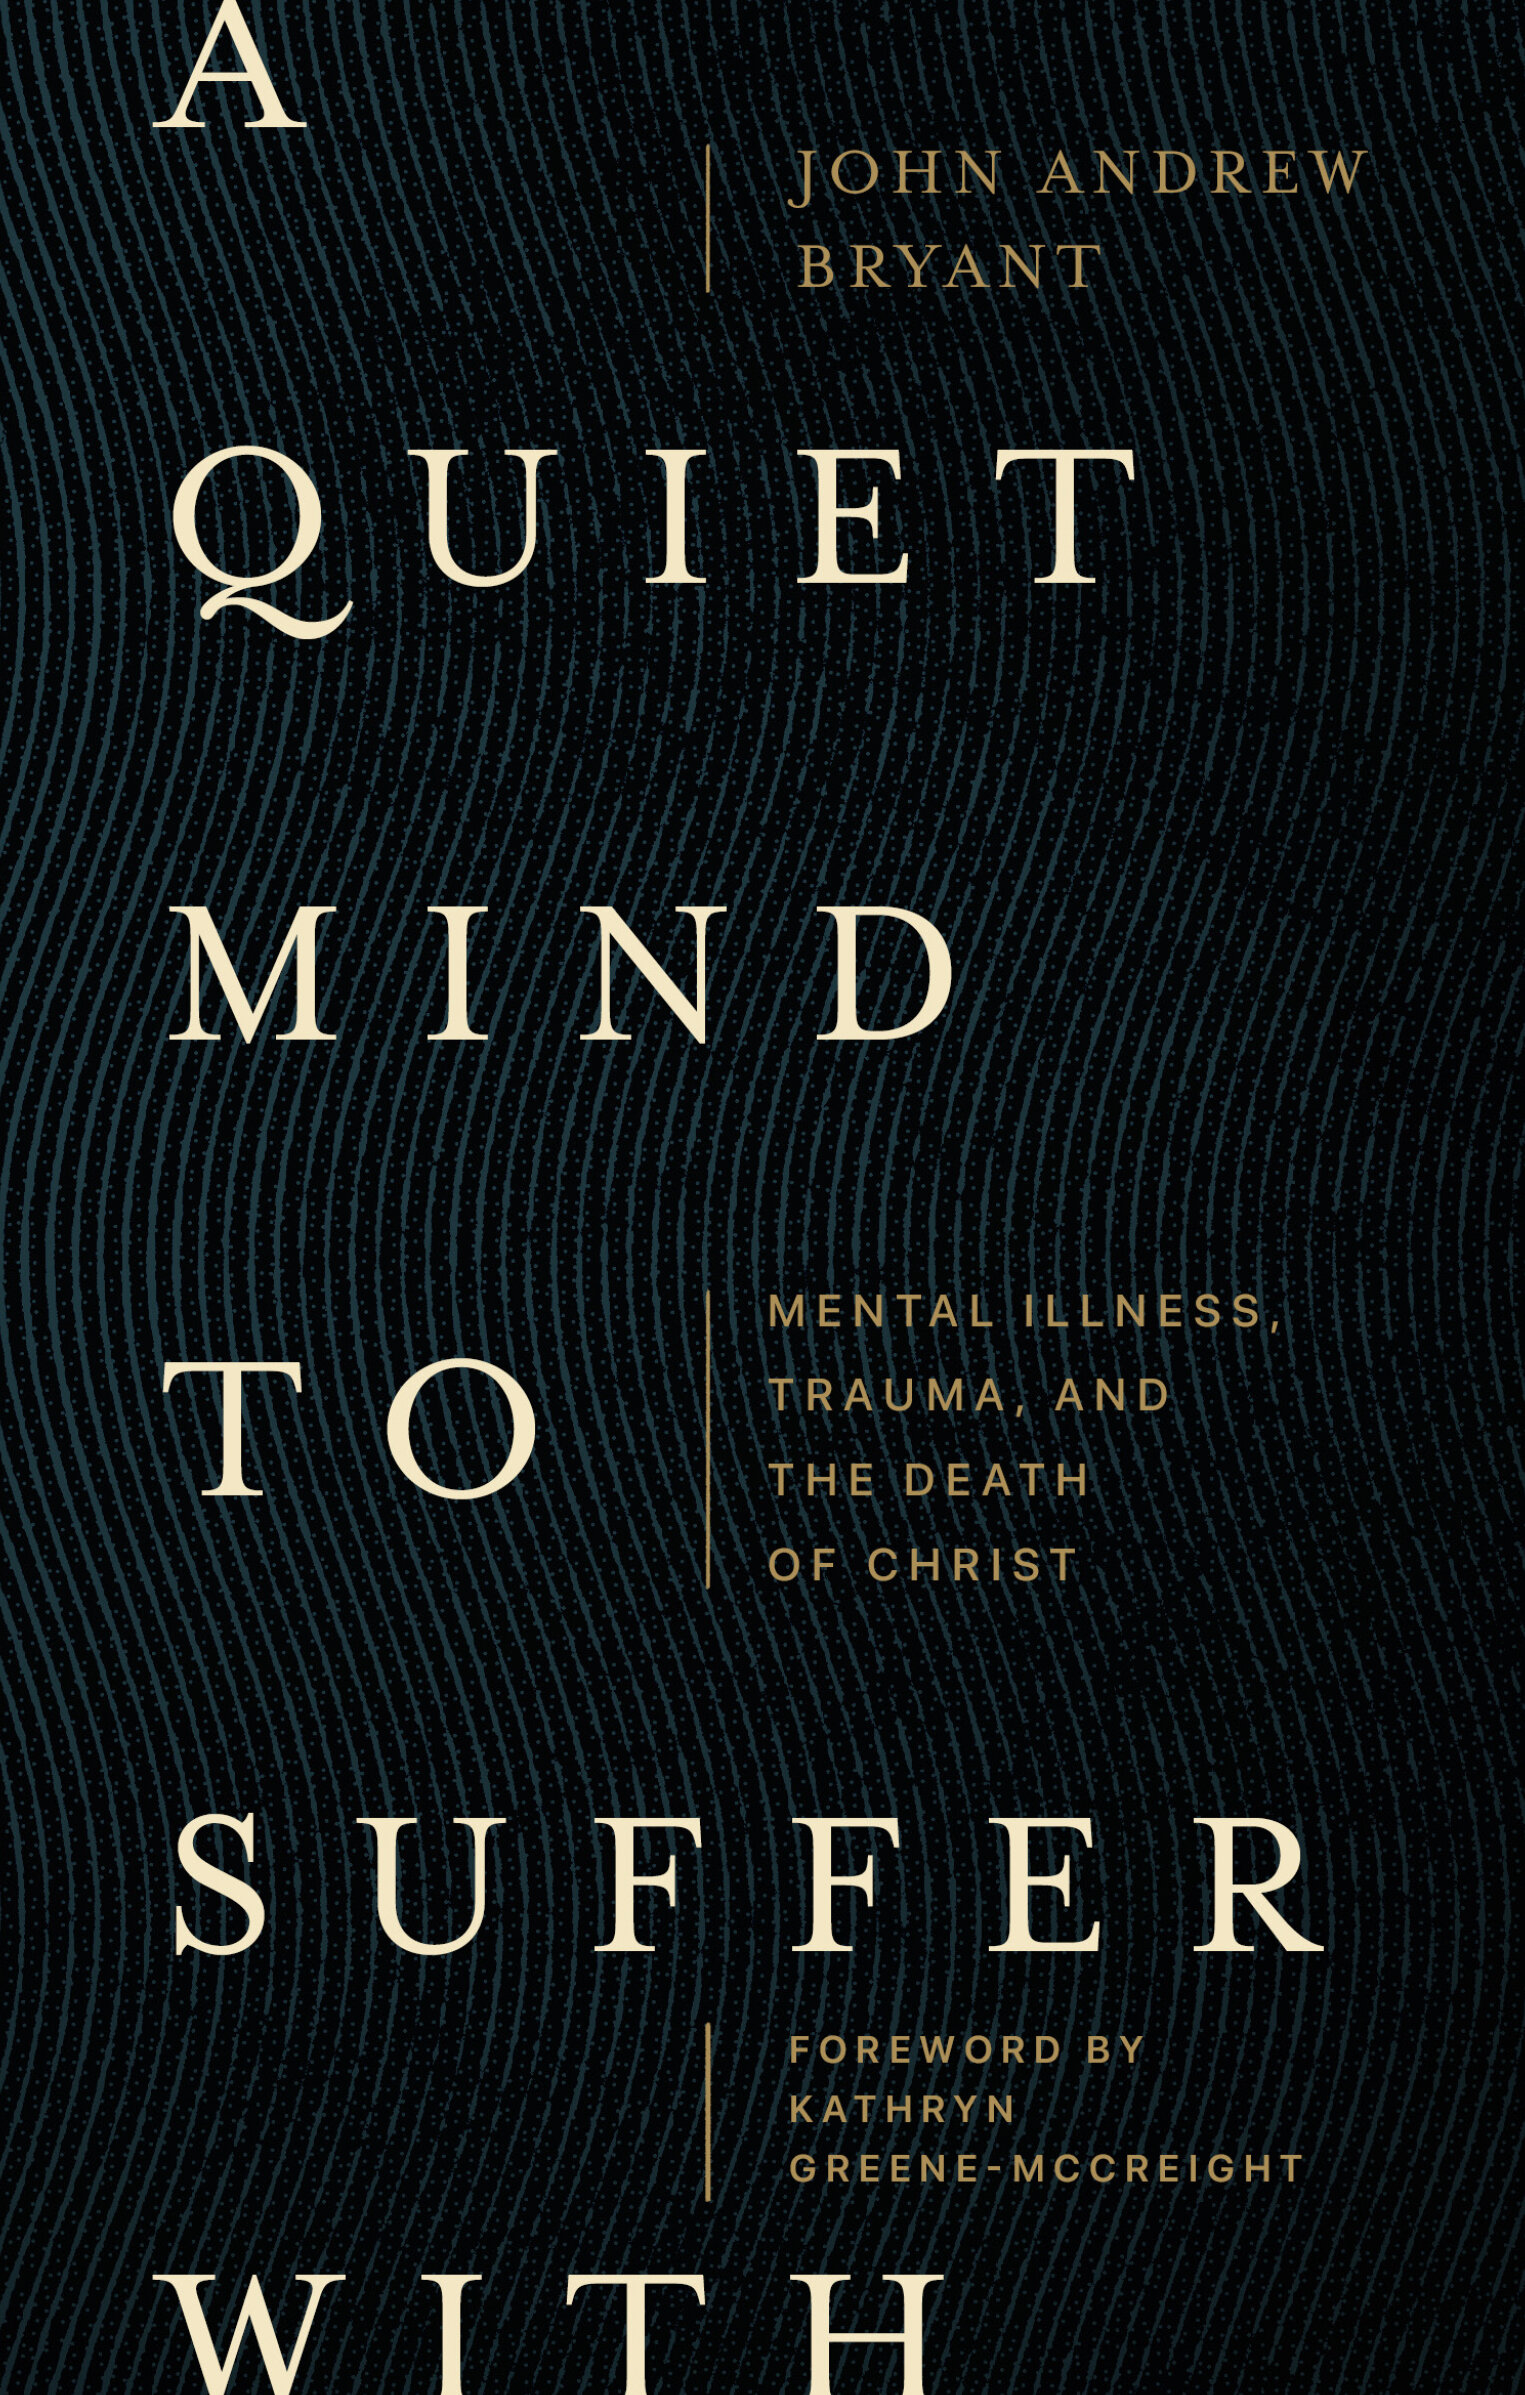 A Quiet Mind to Suffer With